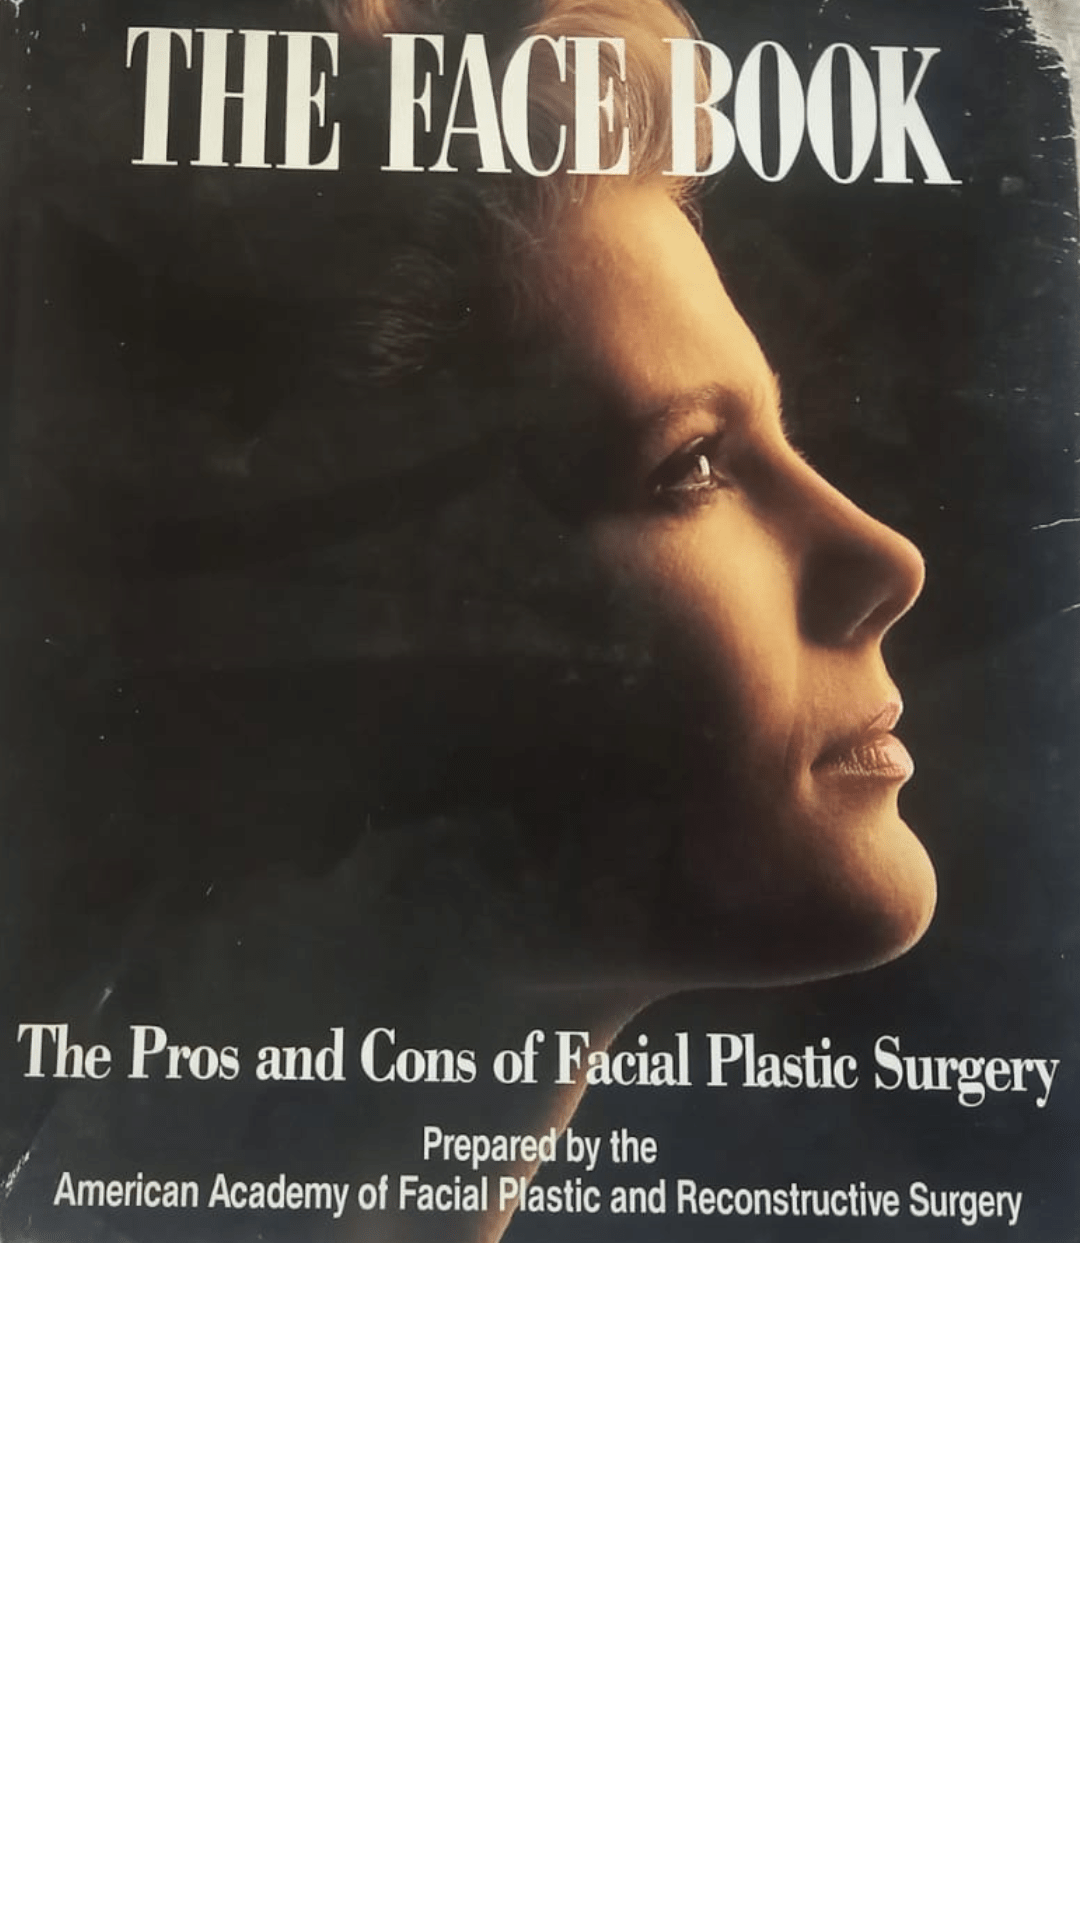 The Face Book: The Pros and Cons of Facial Plastic Surgery